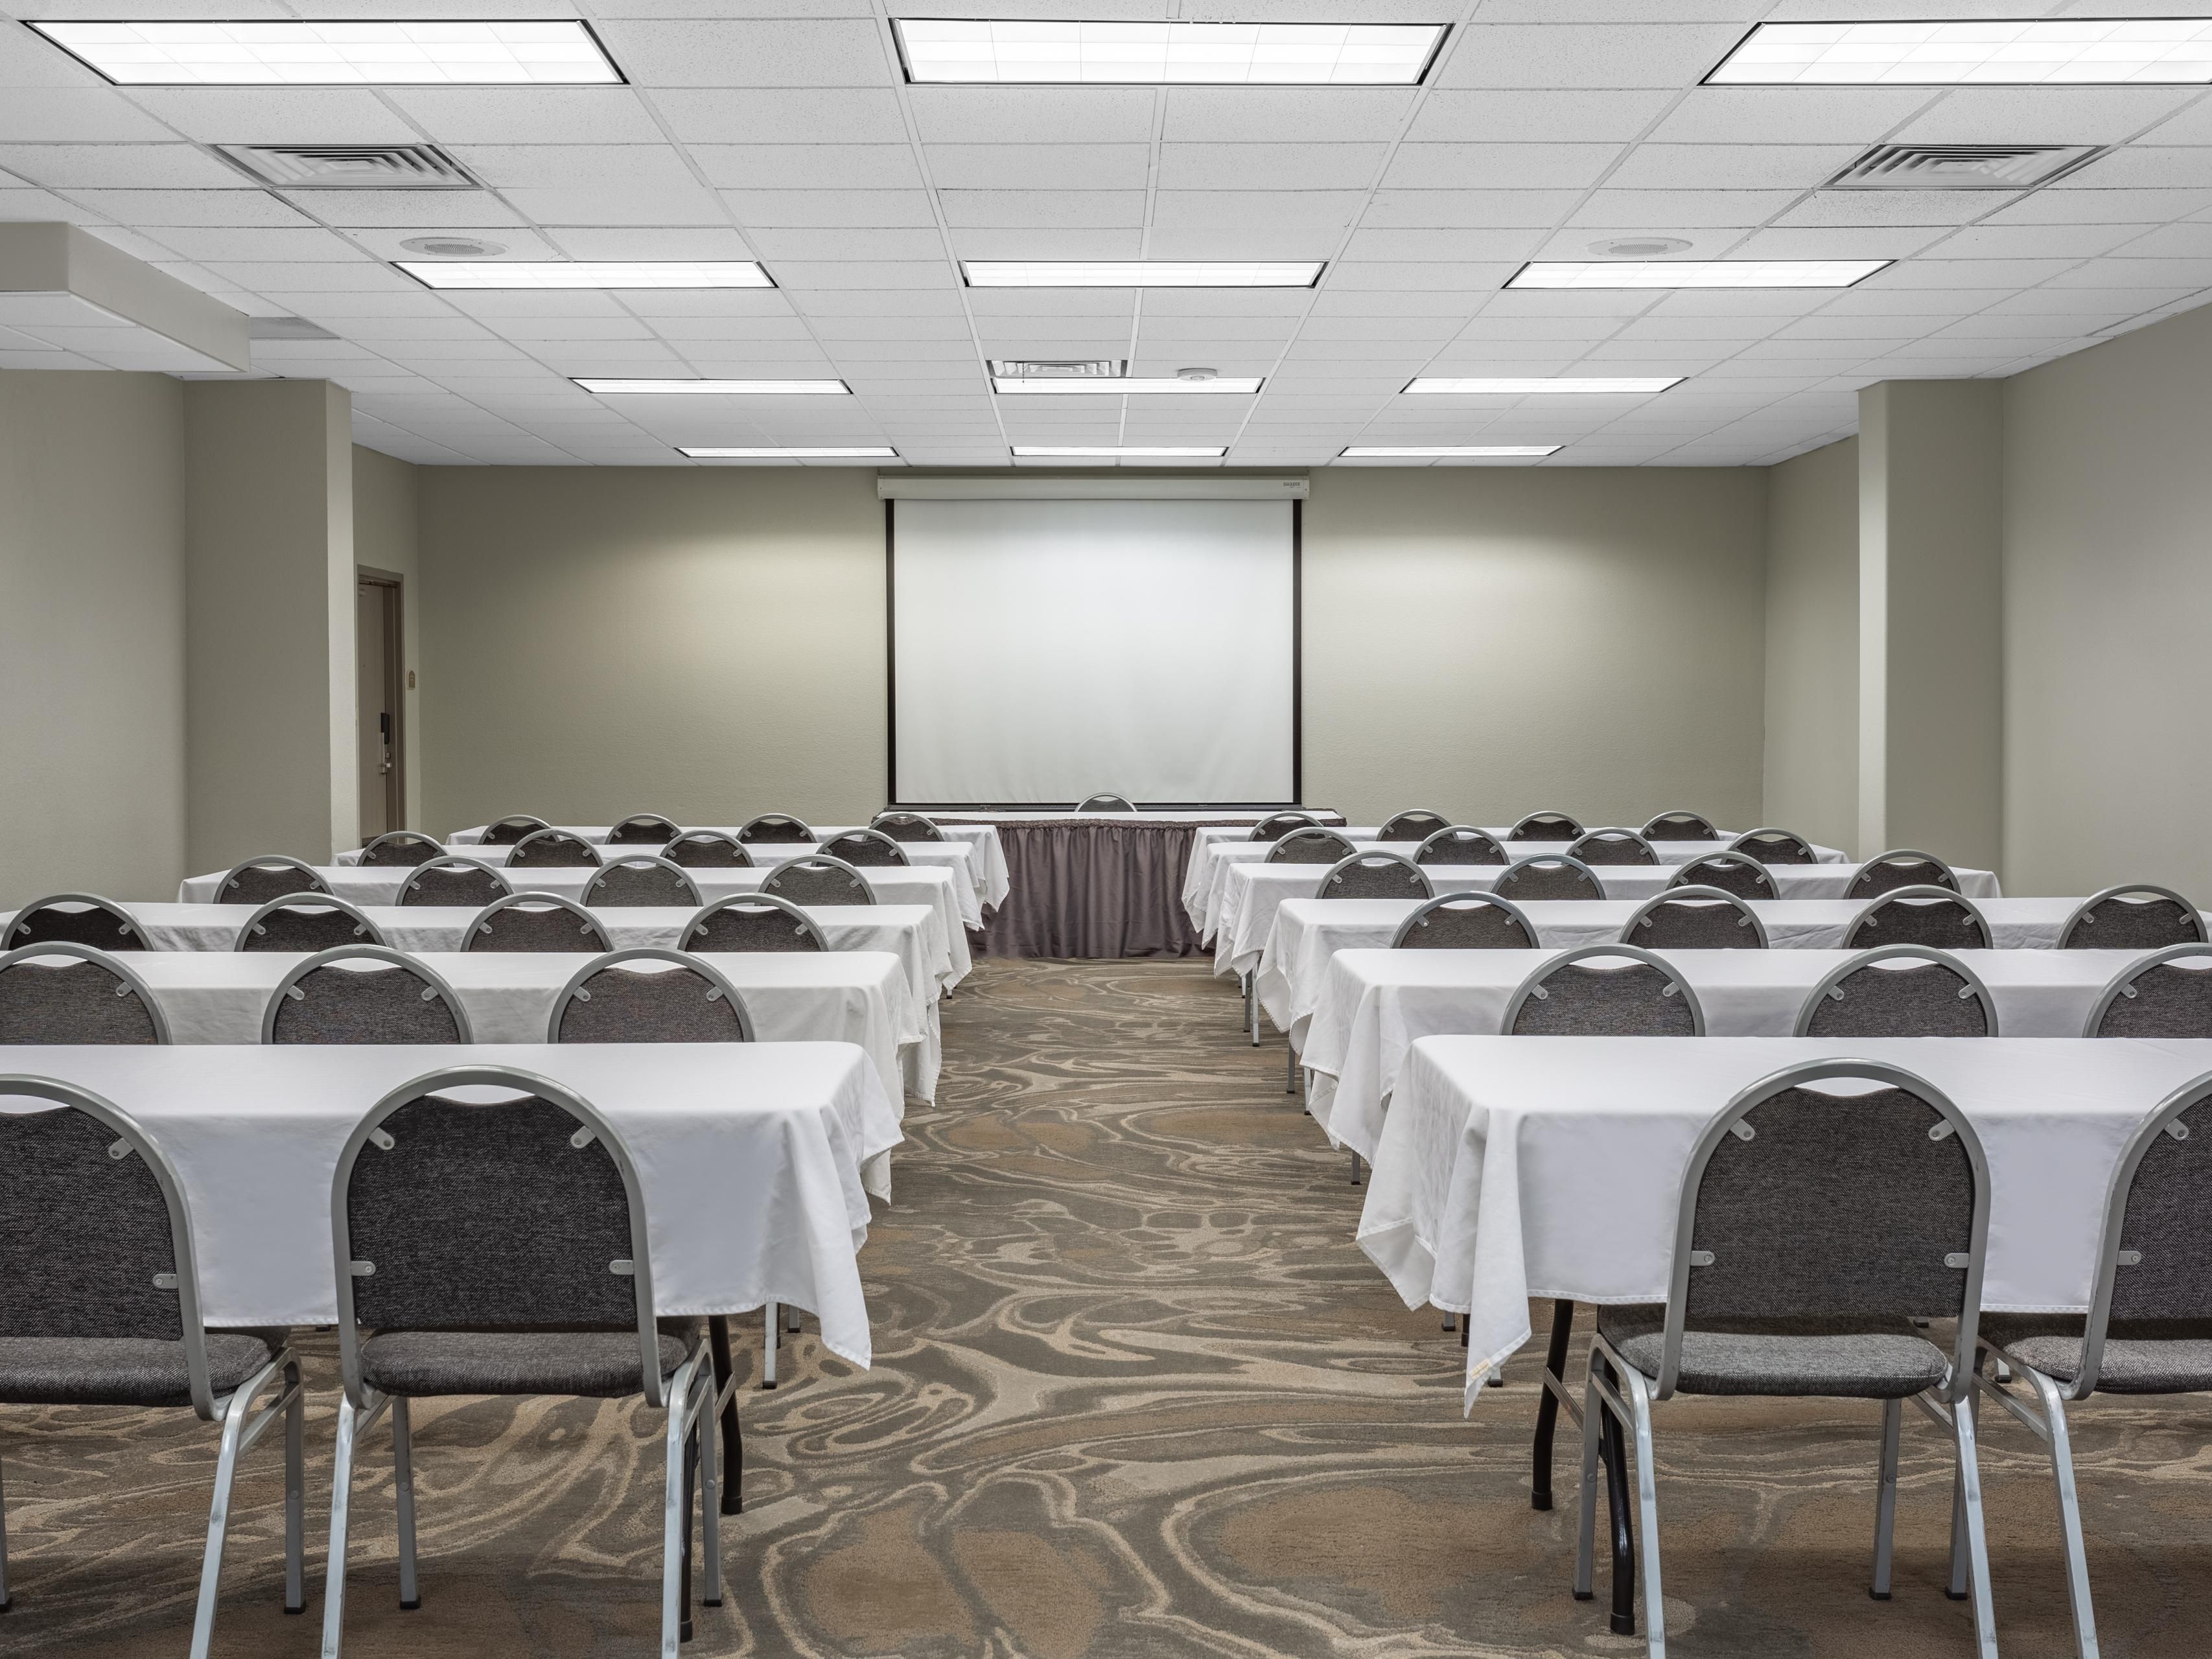 If you are looking for a place to hold your next meeting or gathering, we have several meeting rooms of various sizes available for a variety of events! Click below to email our Director of Sales, Deanna Watts.